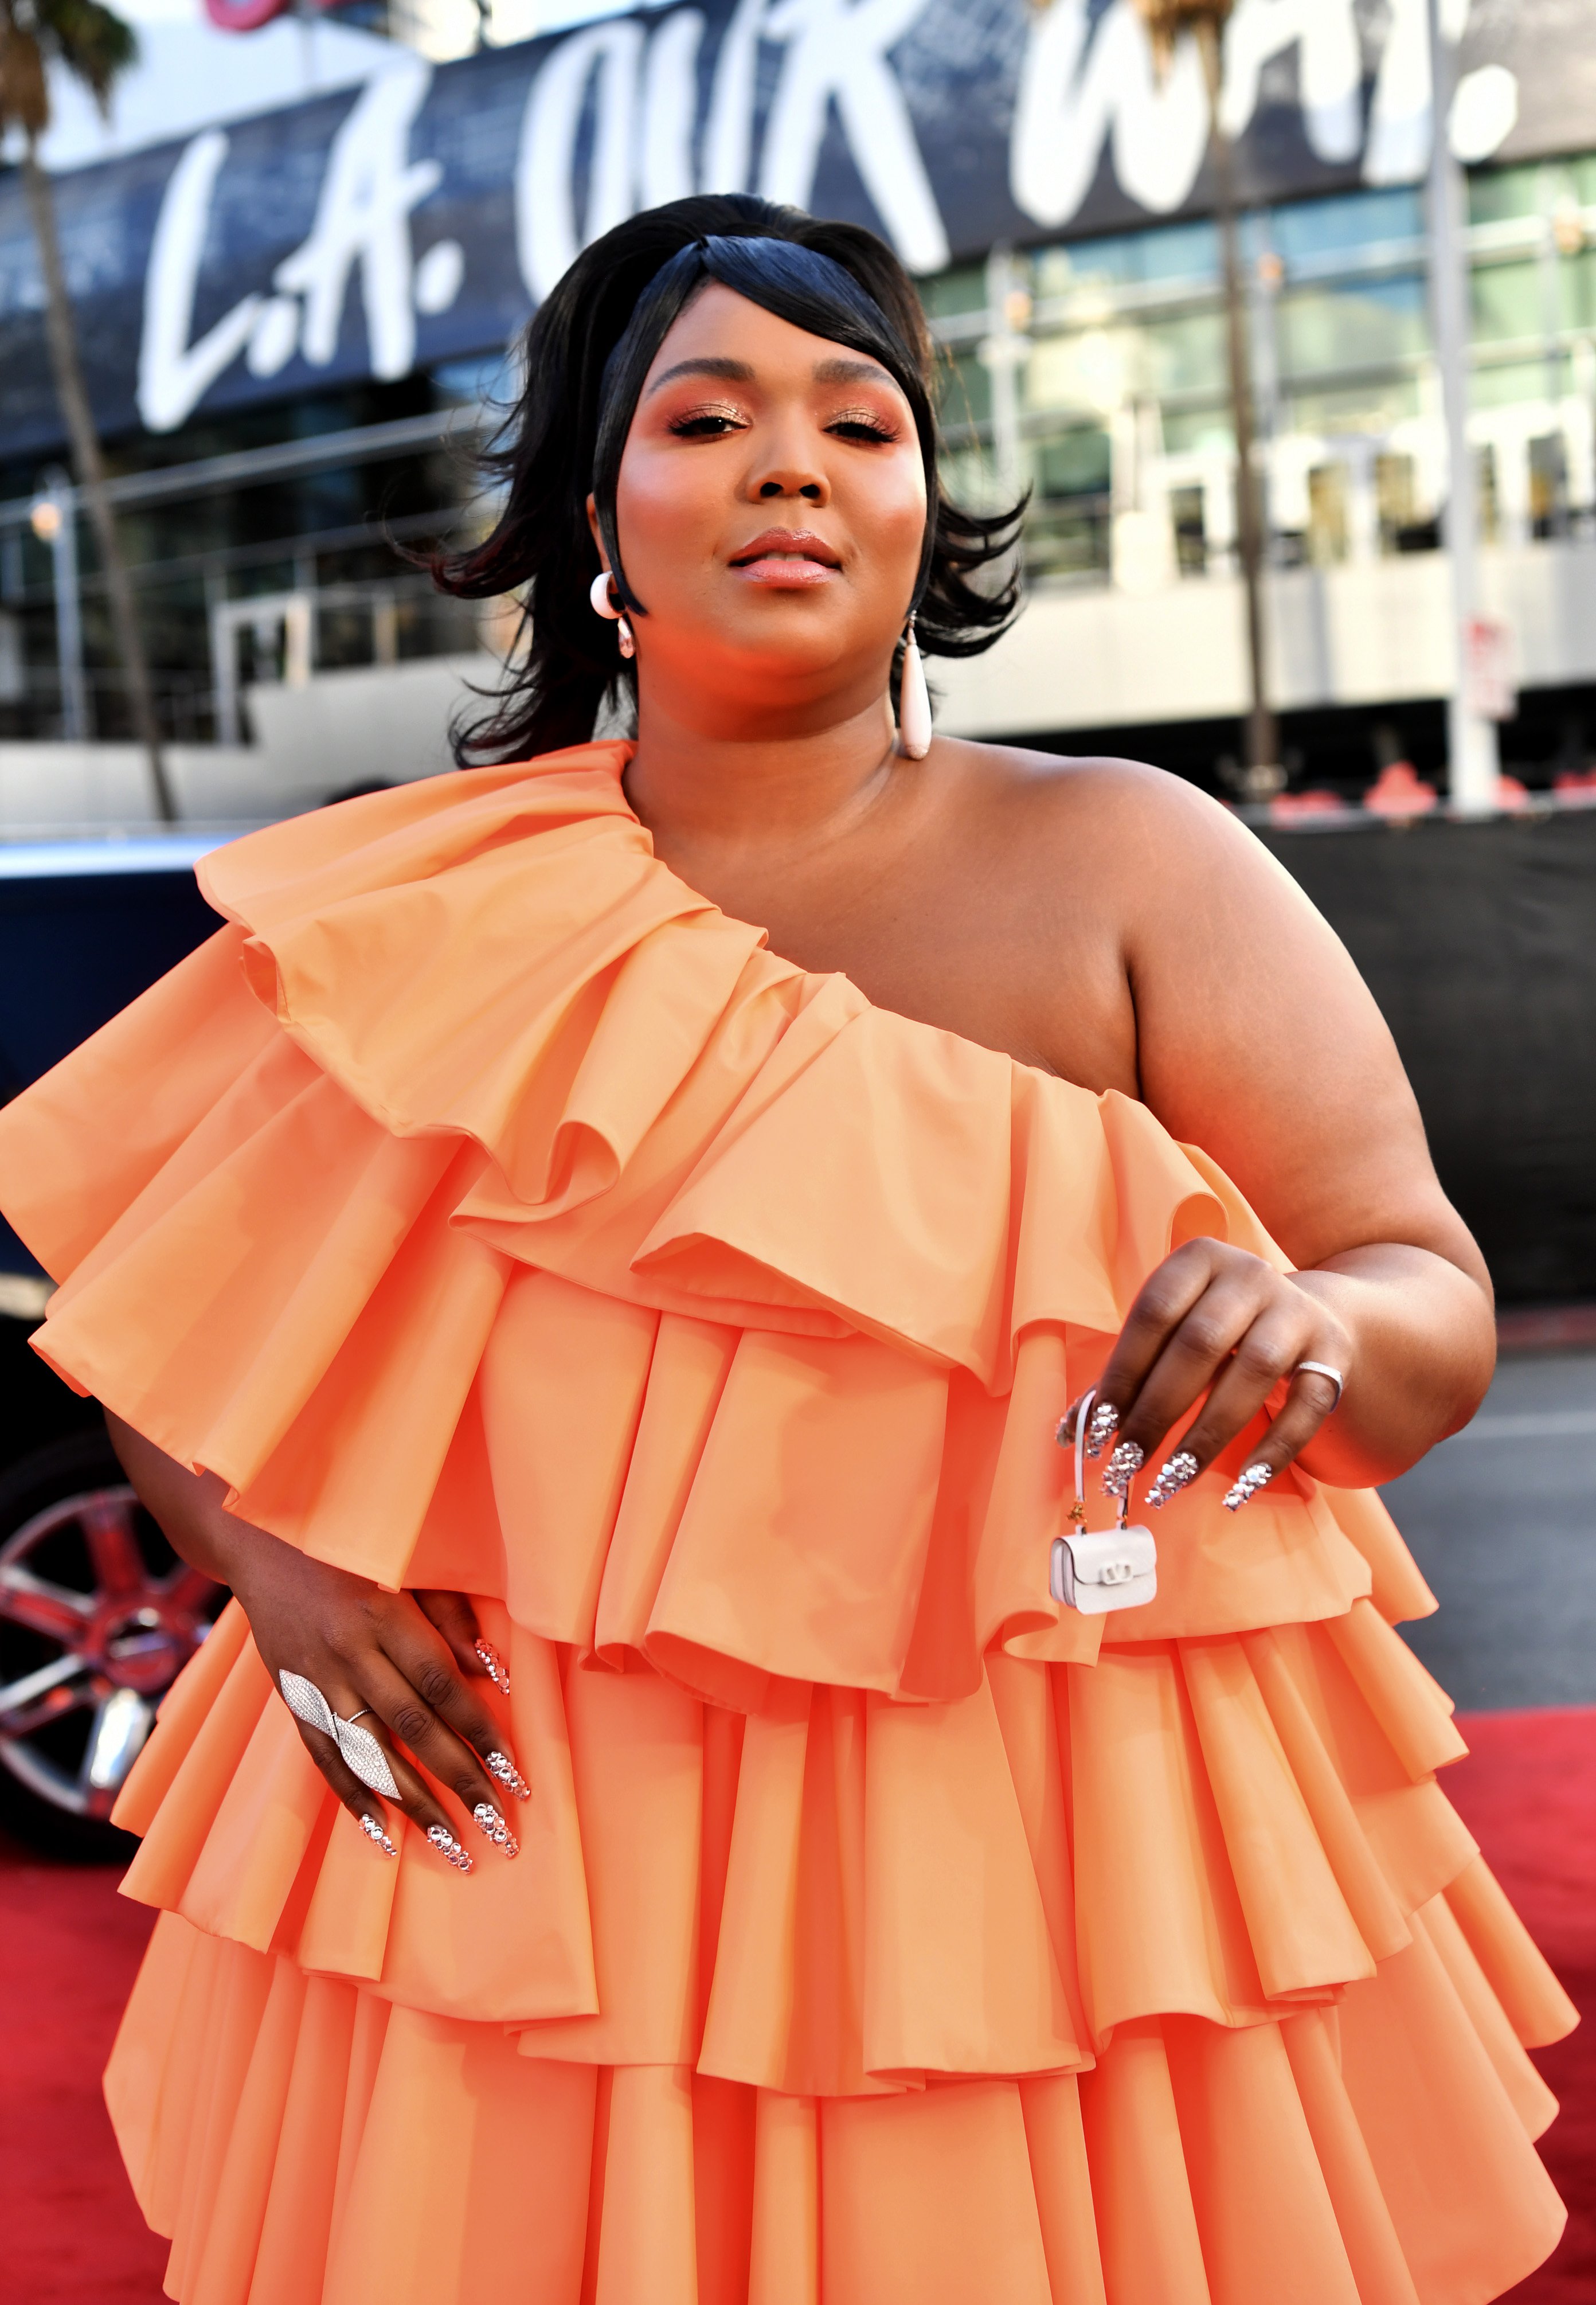  Lizzo attends the 2019 American Music Awards at Microsoft Theater on November 24, 2019| Photo: Getty Images